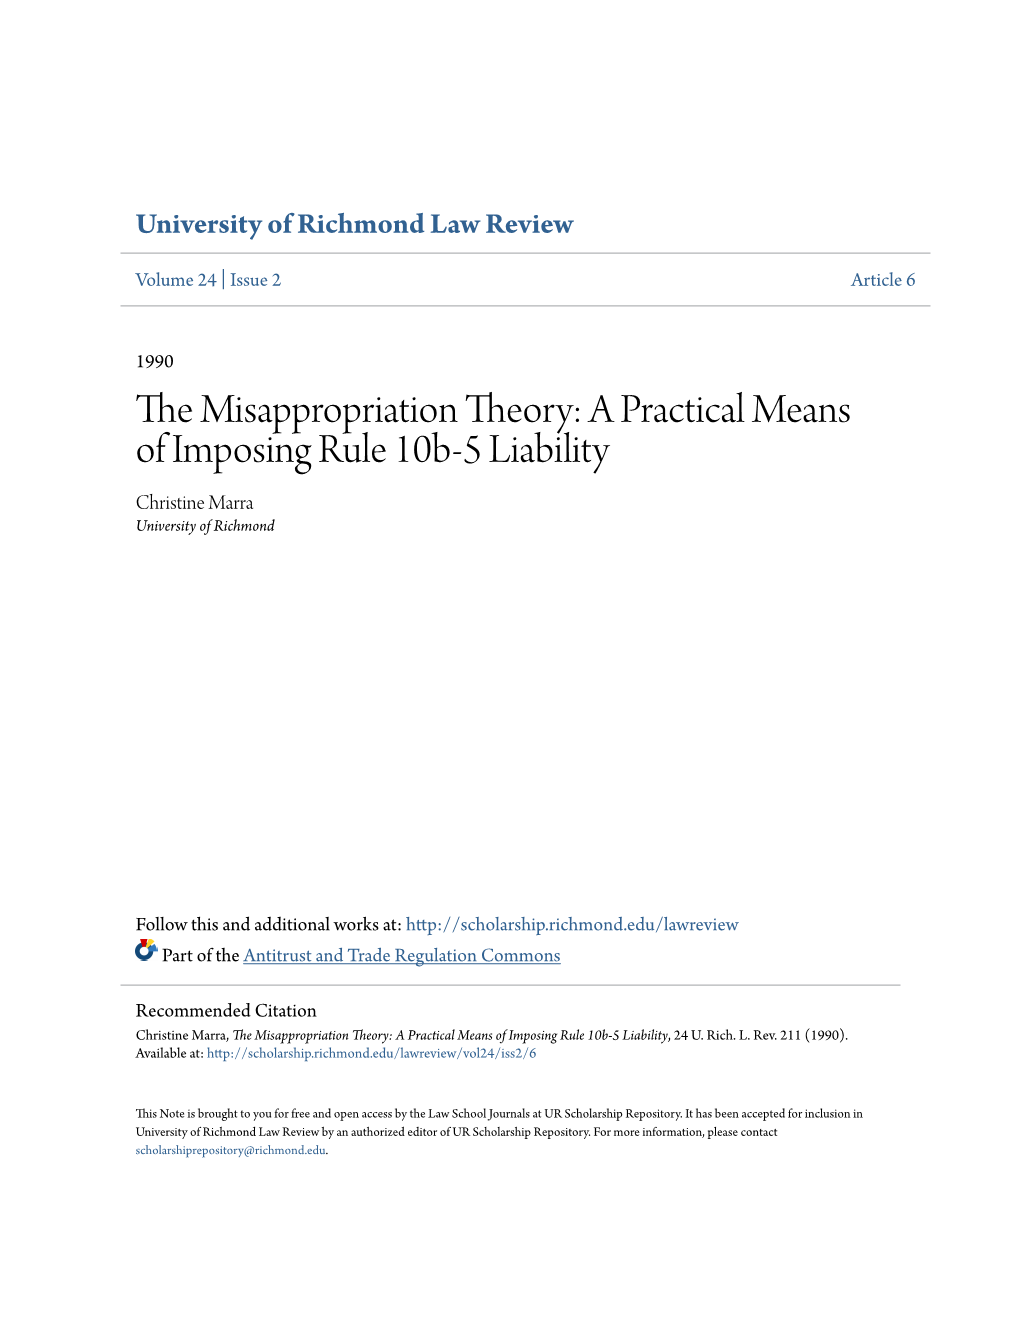 The Misappropriation Theory: a Practical Means of Imposing Rule 10B-5 Liability, 24 U